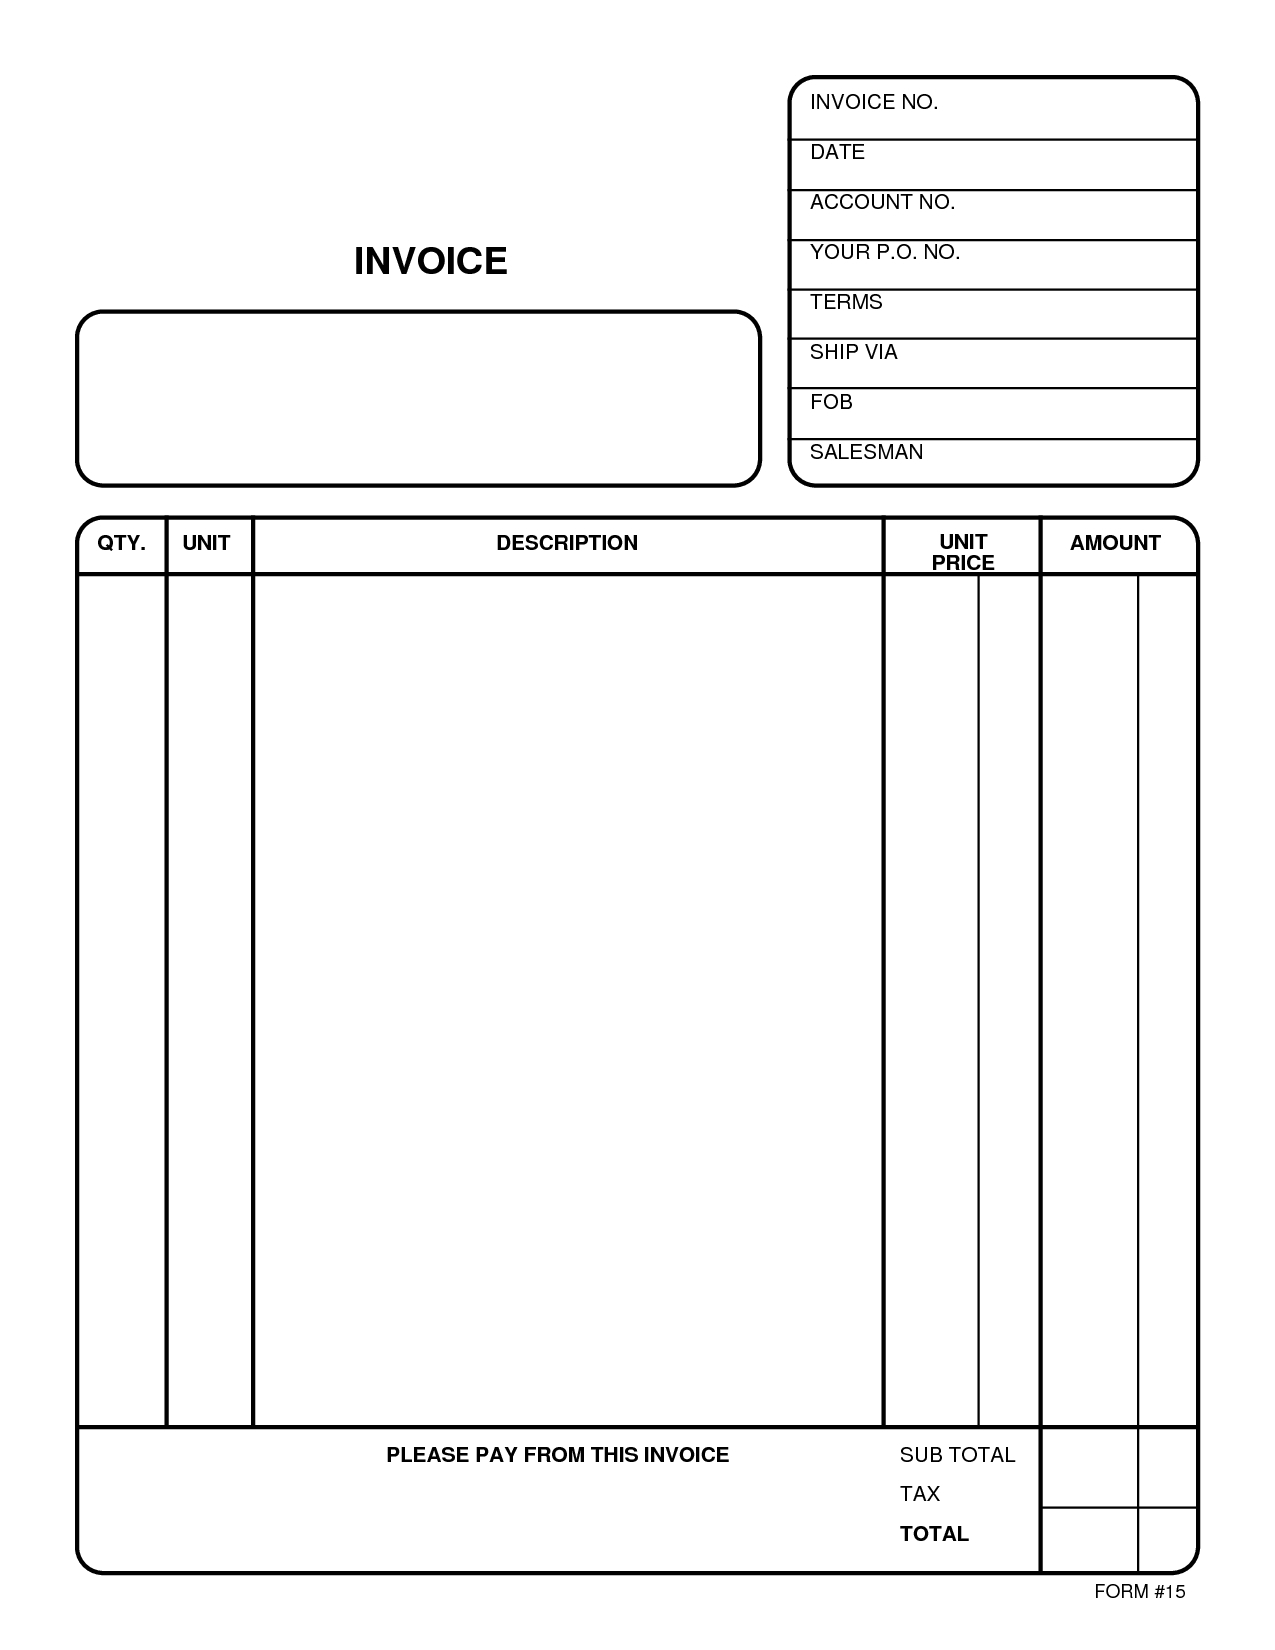 free template for invoice free templates for invoices invoice template free 2016 1275 X 1650